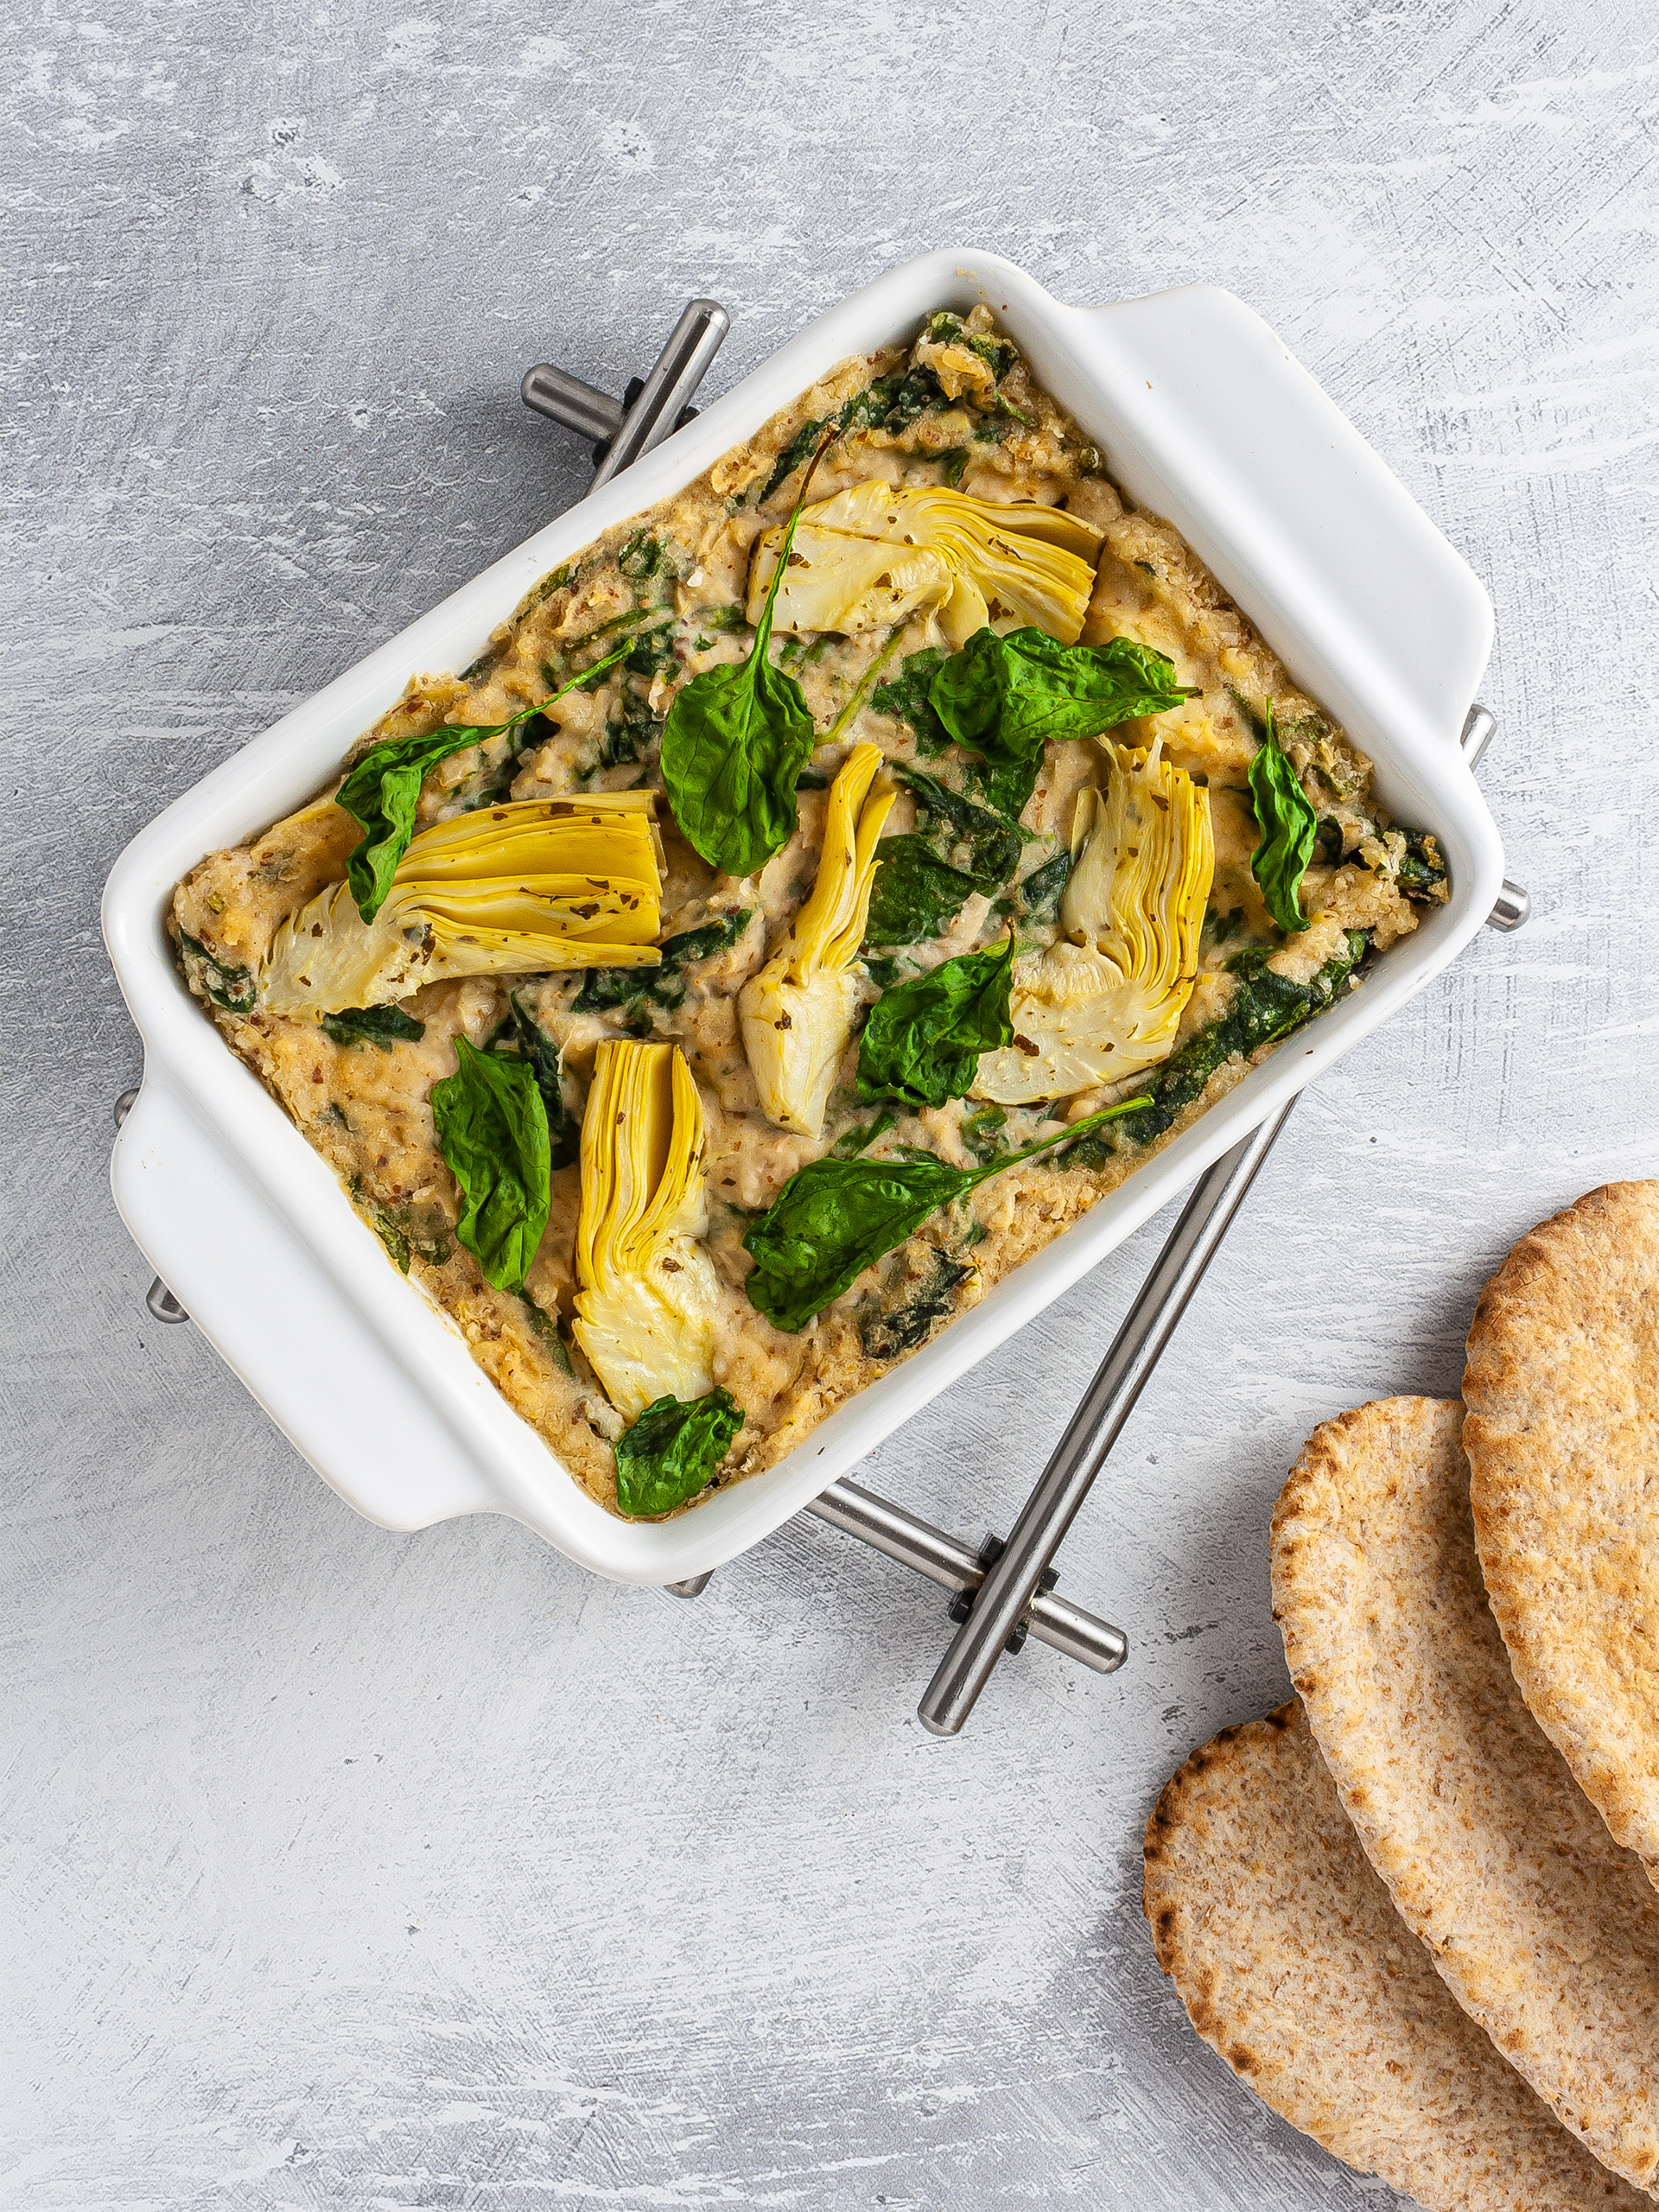 Baked spinach artichoke dip served with pitta bread.